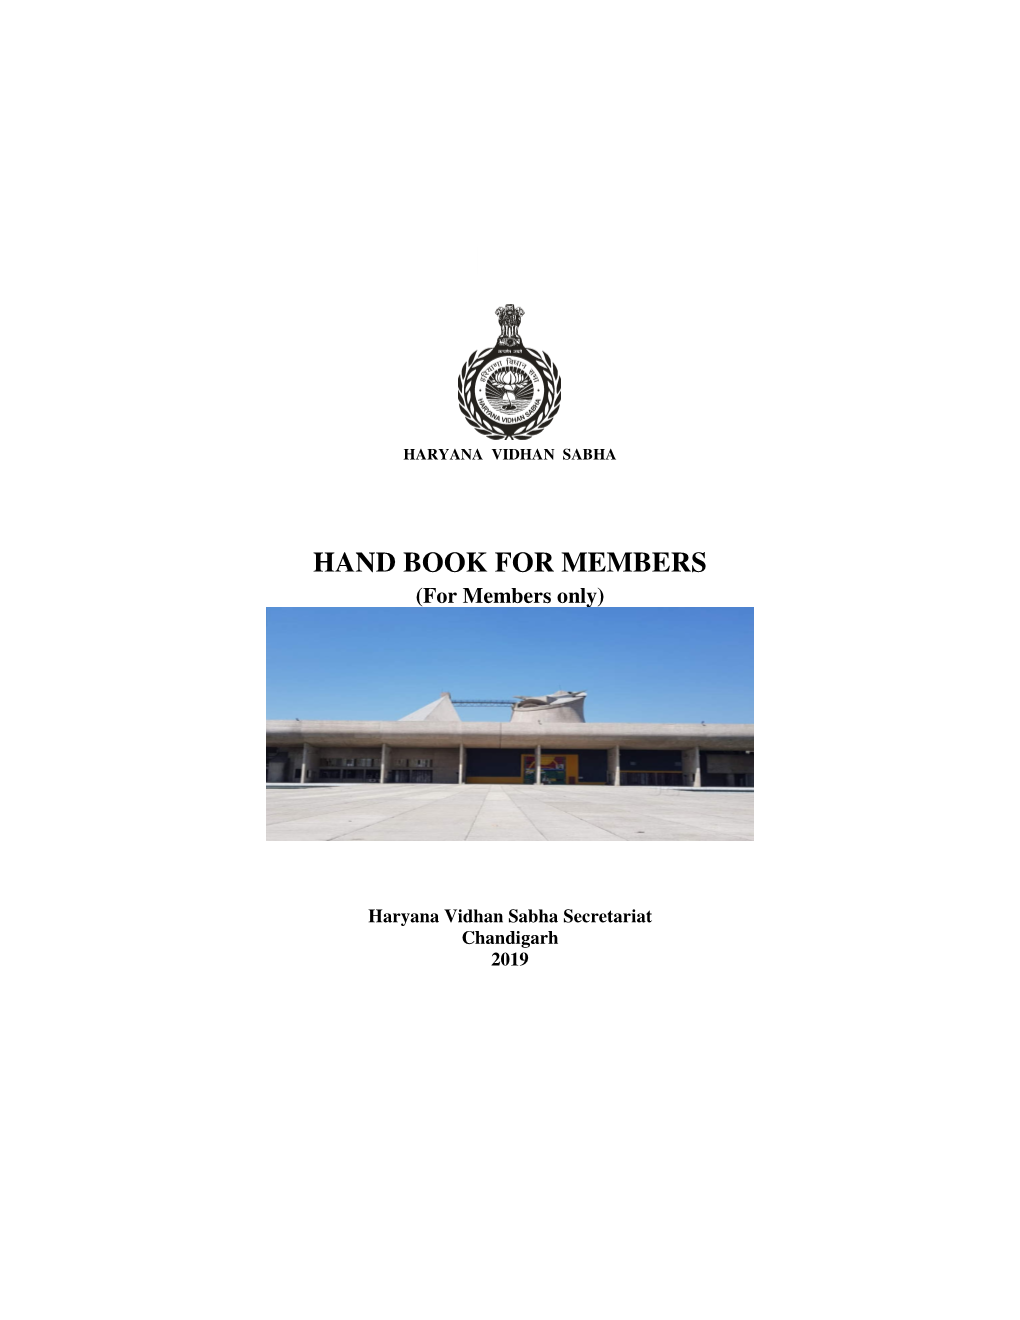 HAND BOOK for MEMBERS (For Members Only)